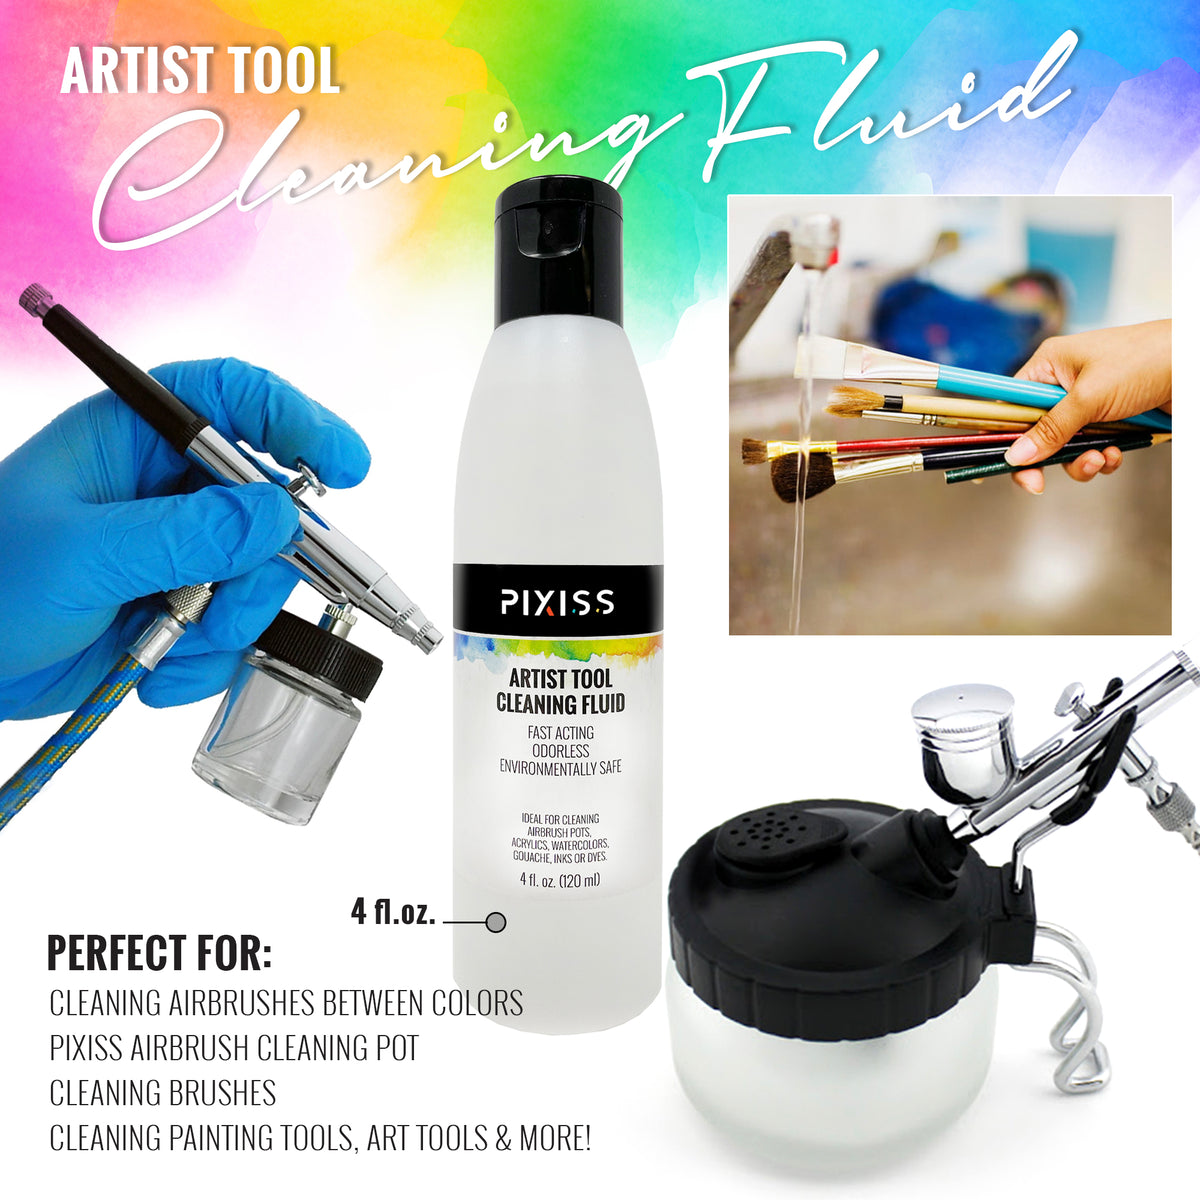 Pixiss Air Brush Painting Set with Airbrush Cleaner Pot and Brush